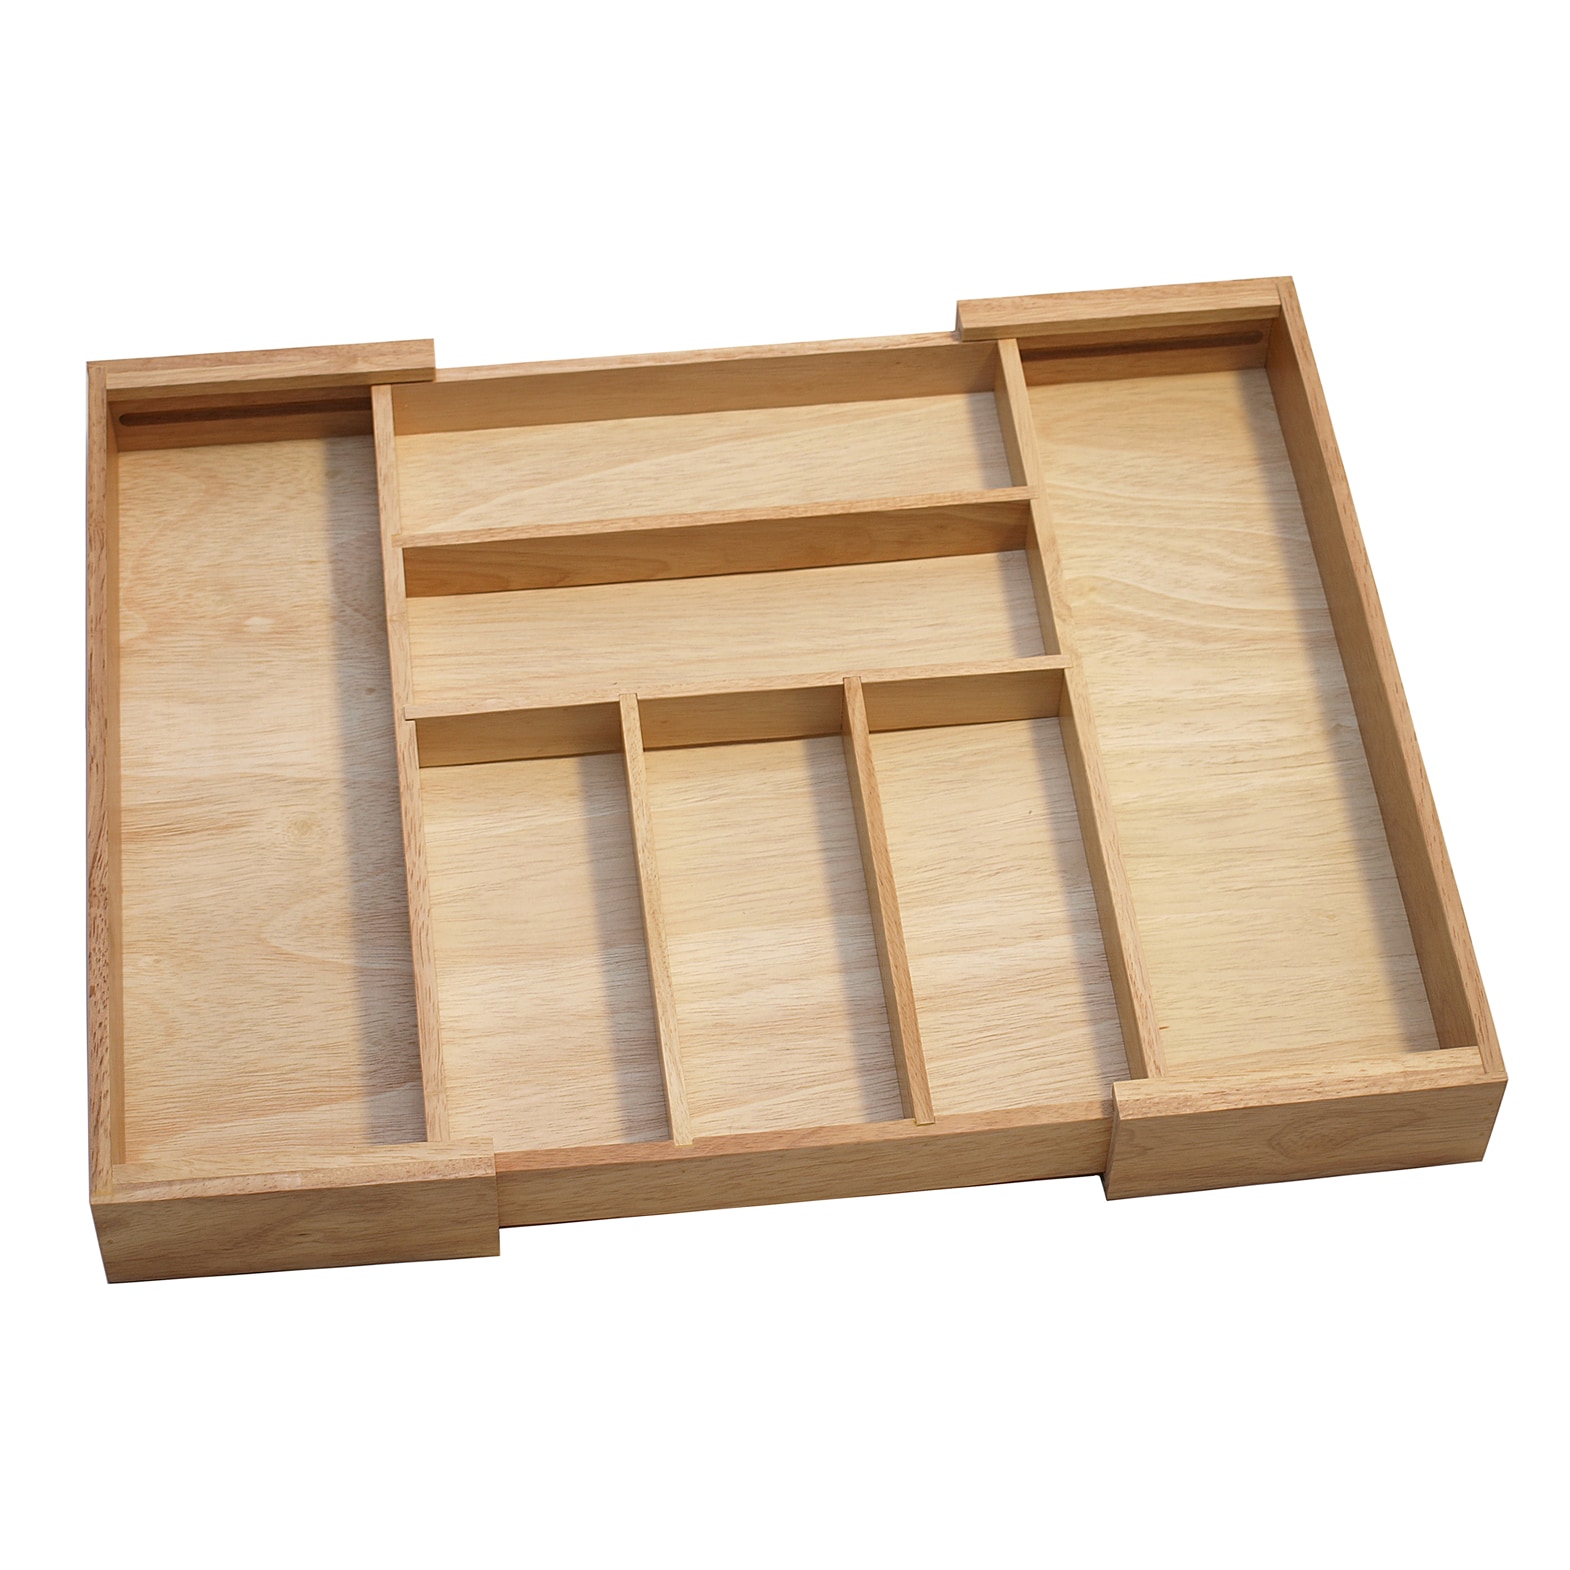 Hastings Home Bamboo Drawer Organizer with 4 Compartments, Brown